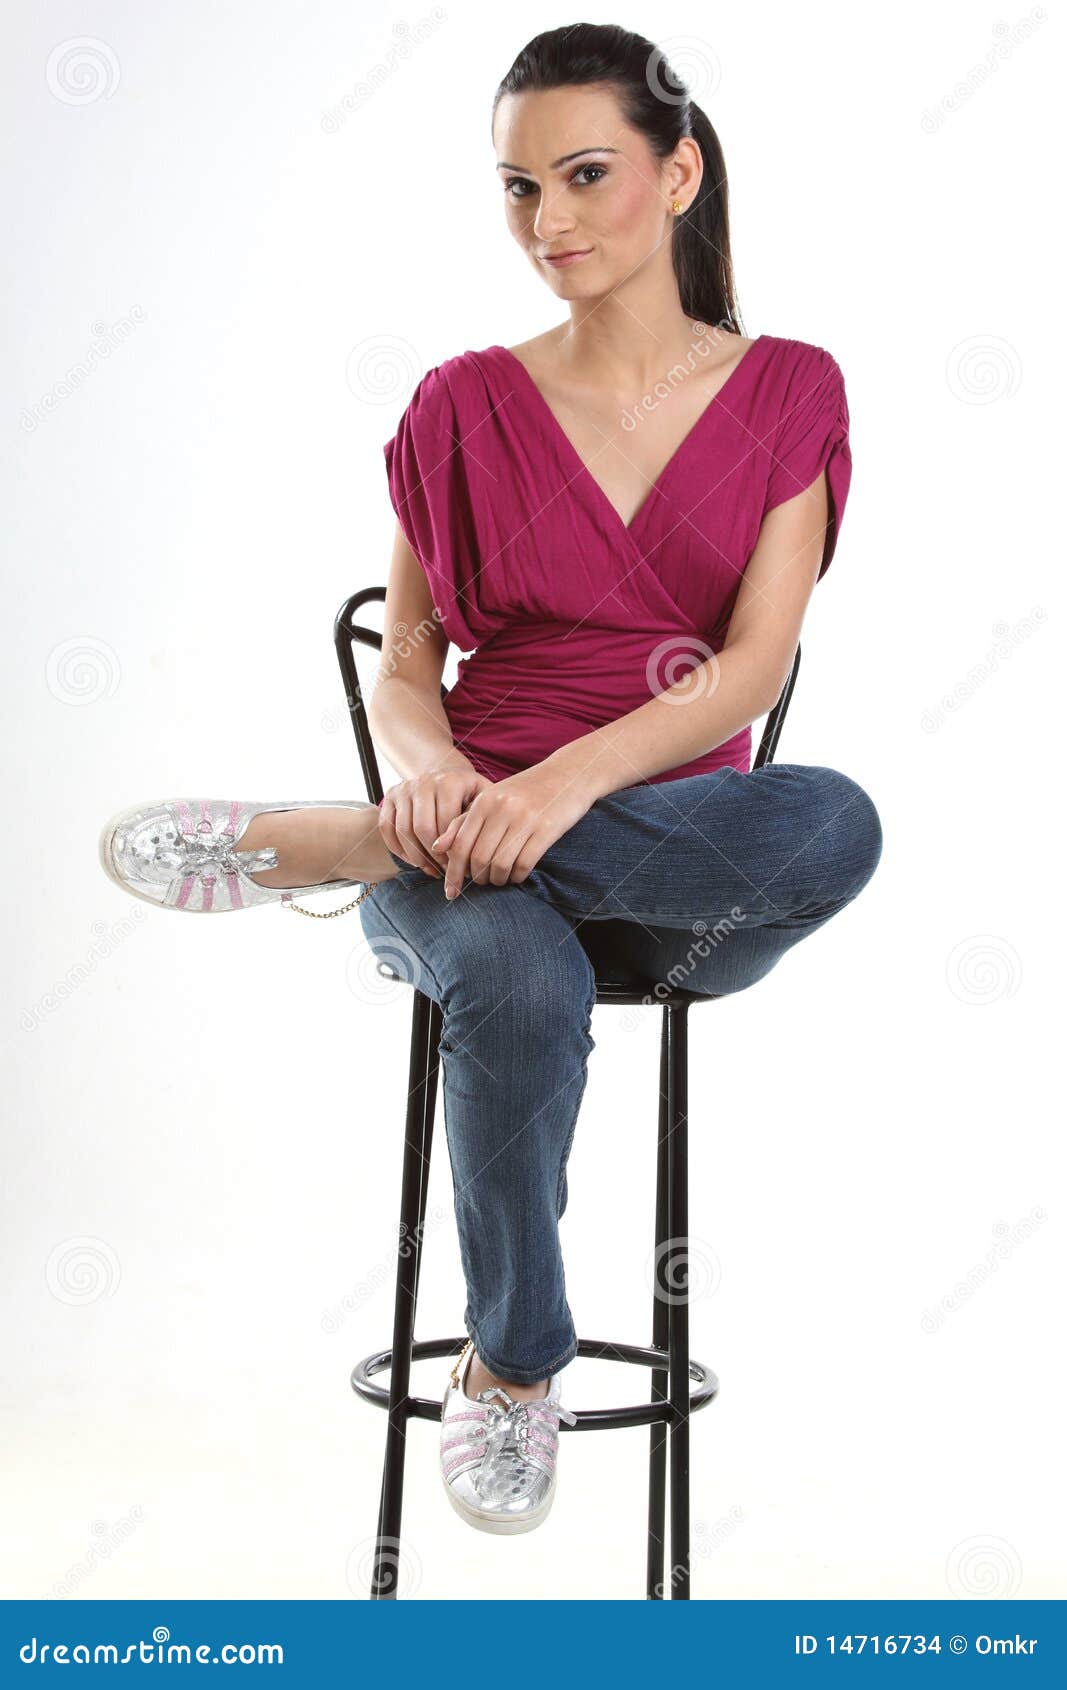 Teenage Girl Sitting On A Chair Stock Photo Image of